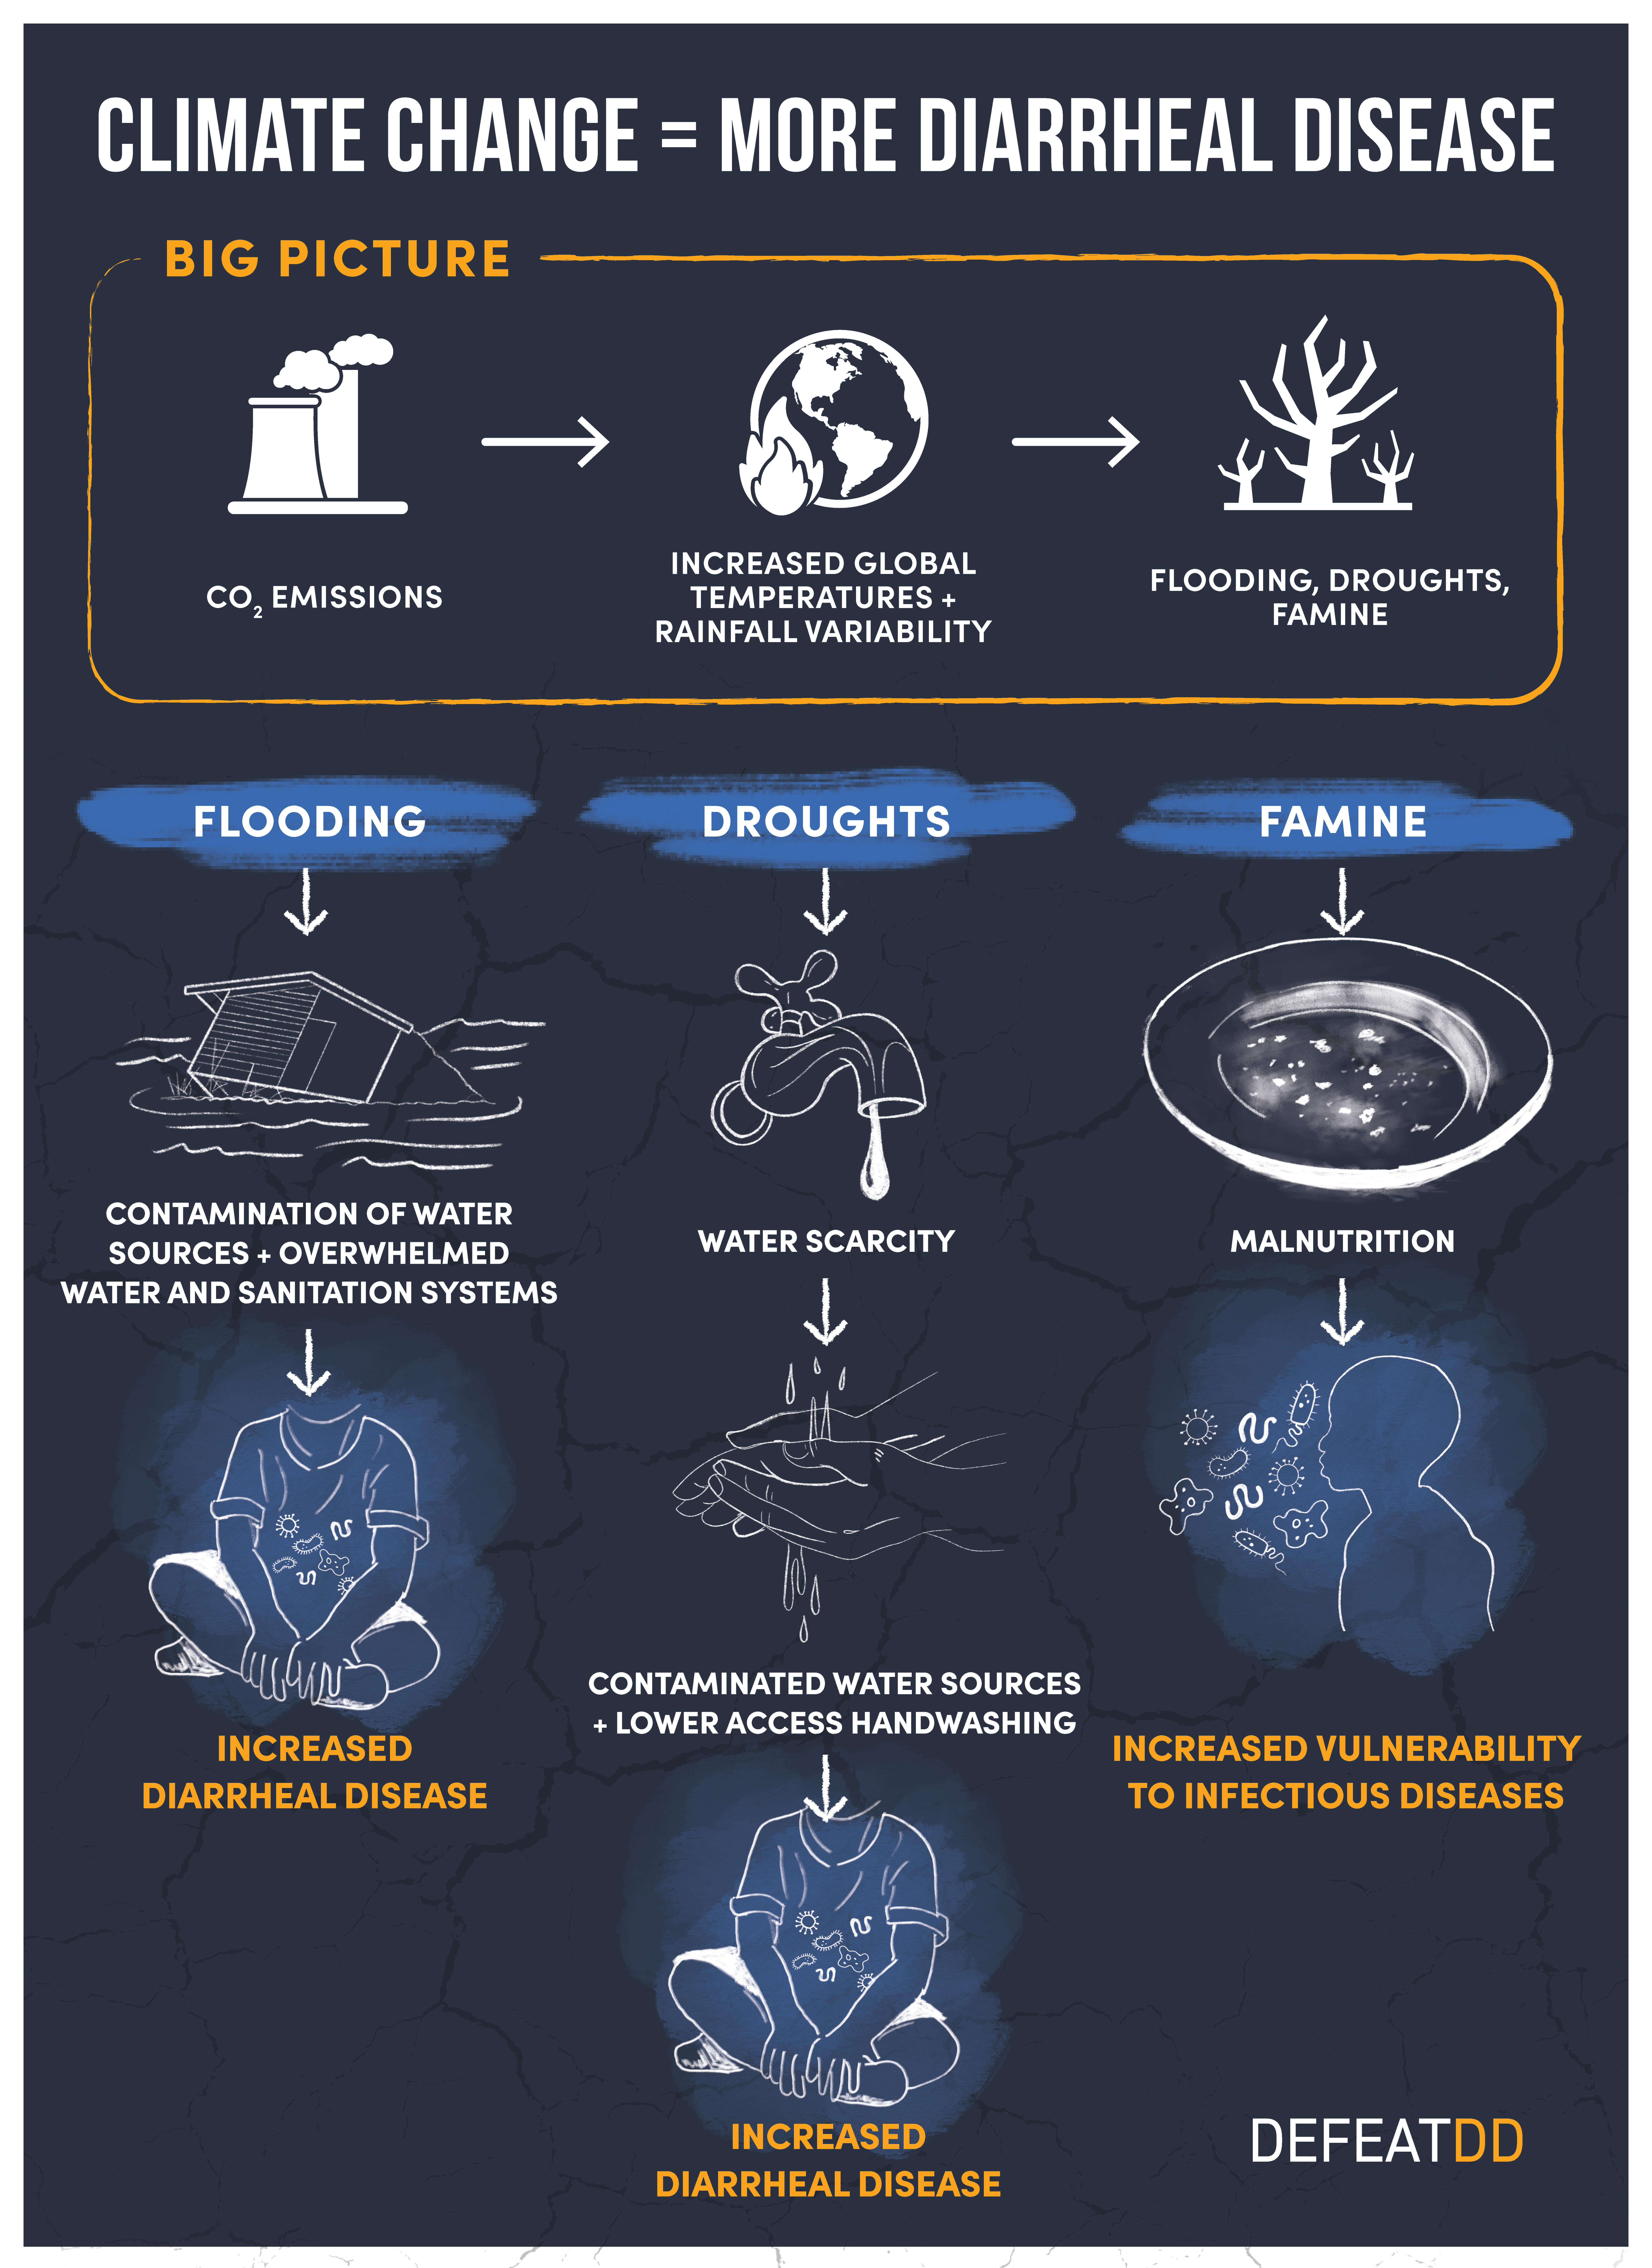 Infographic: CLIMATE CHANGE = MORE DIARRHEAL DISEASE